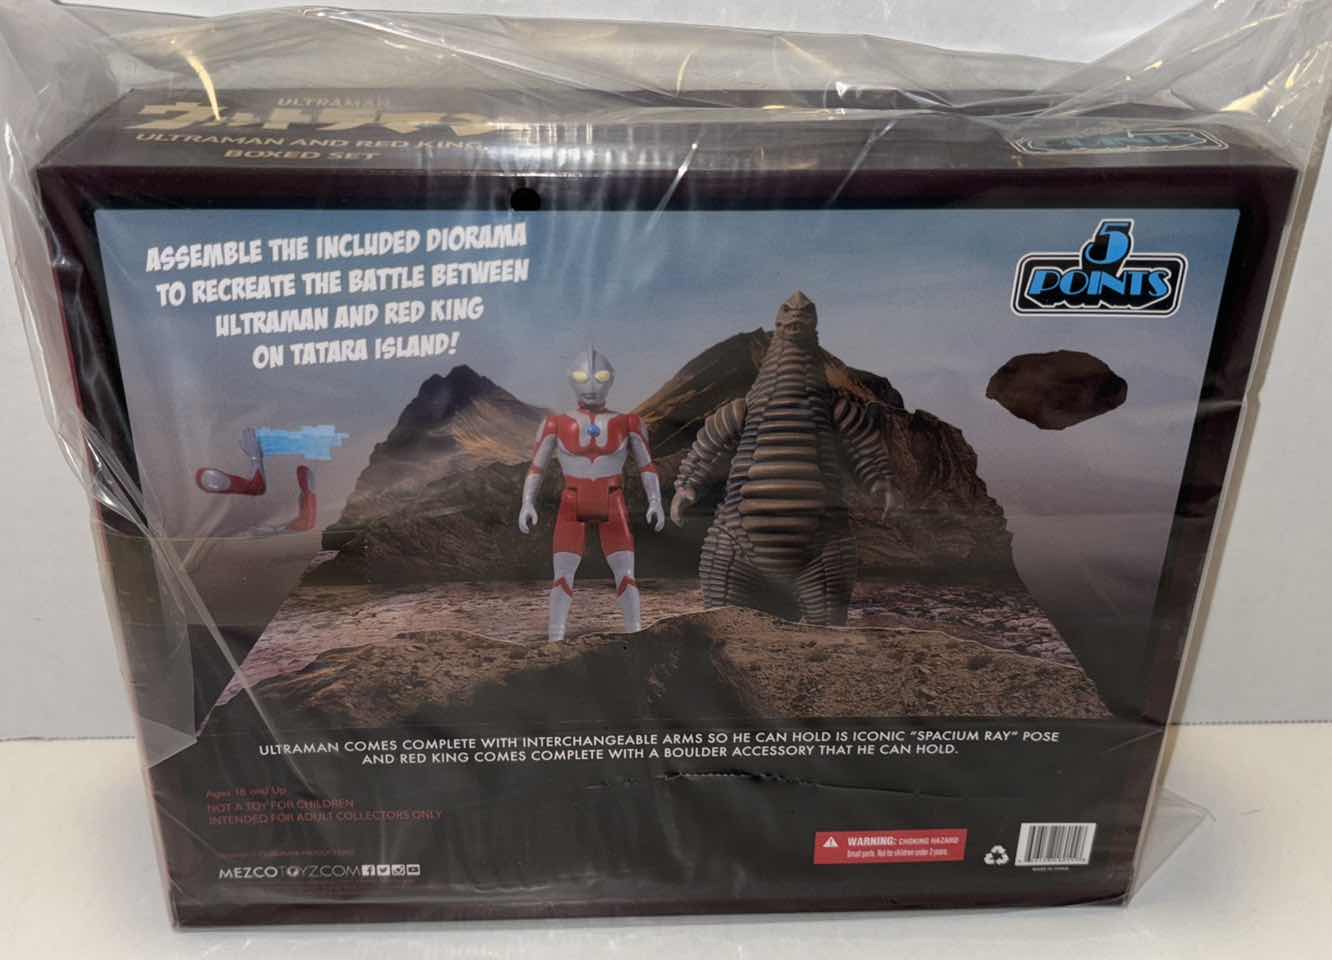 Photo 3 of NEW MEZCO TOYZ 5 POINTS ULTRAMAN AND RED KING BOXED SET (1)